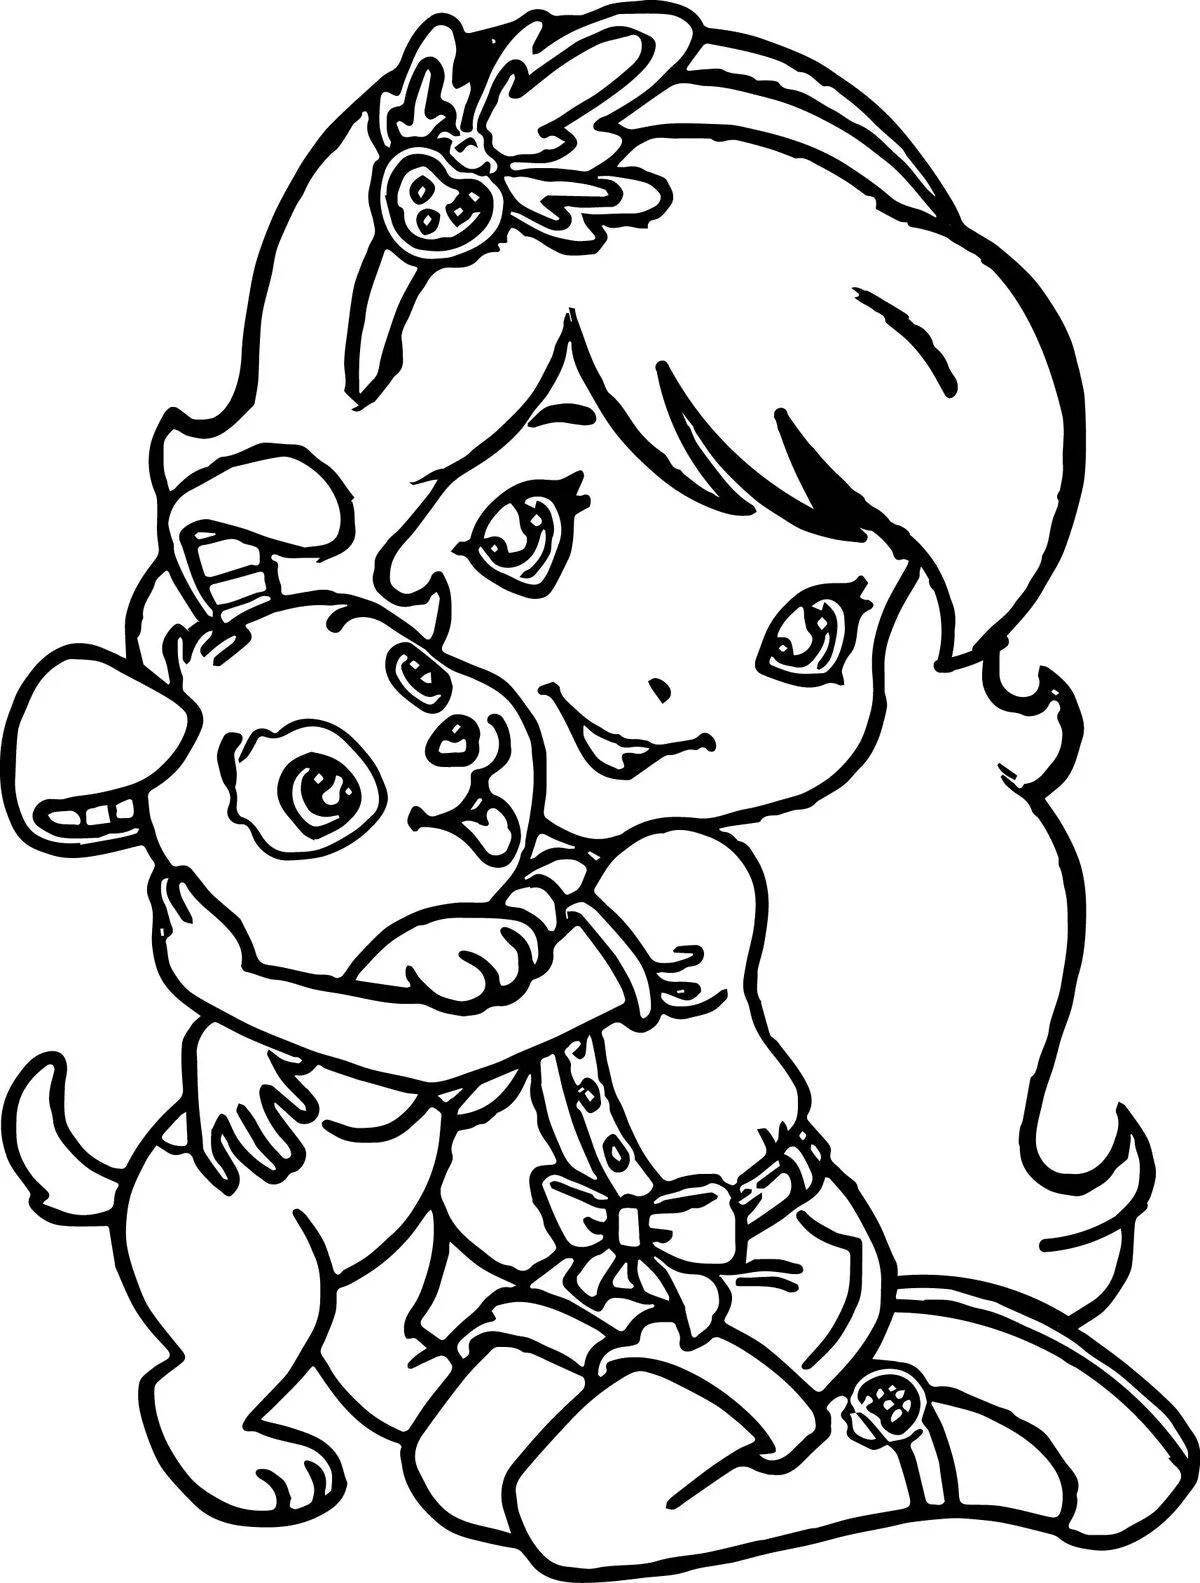 Violent coloring page turn on